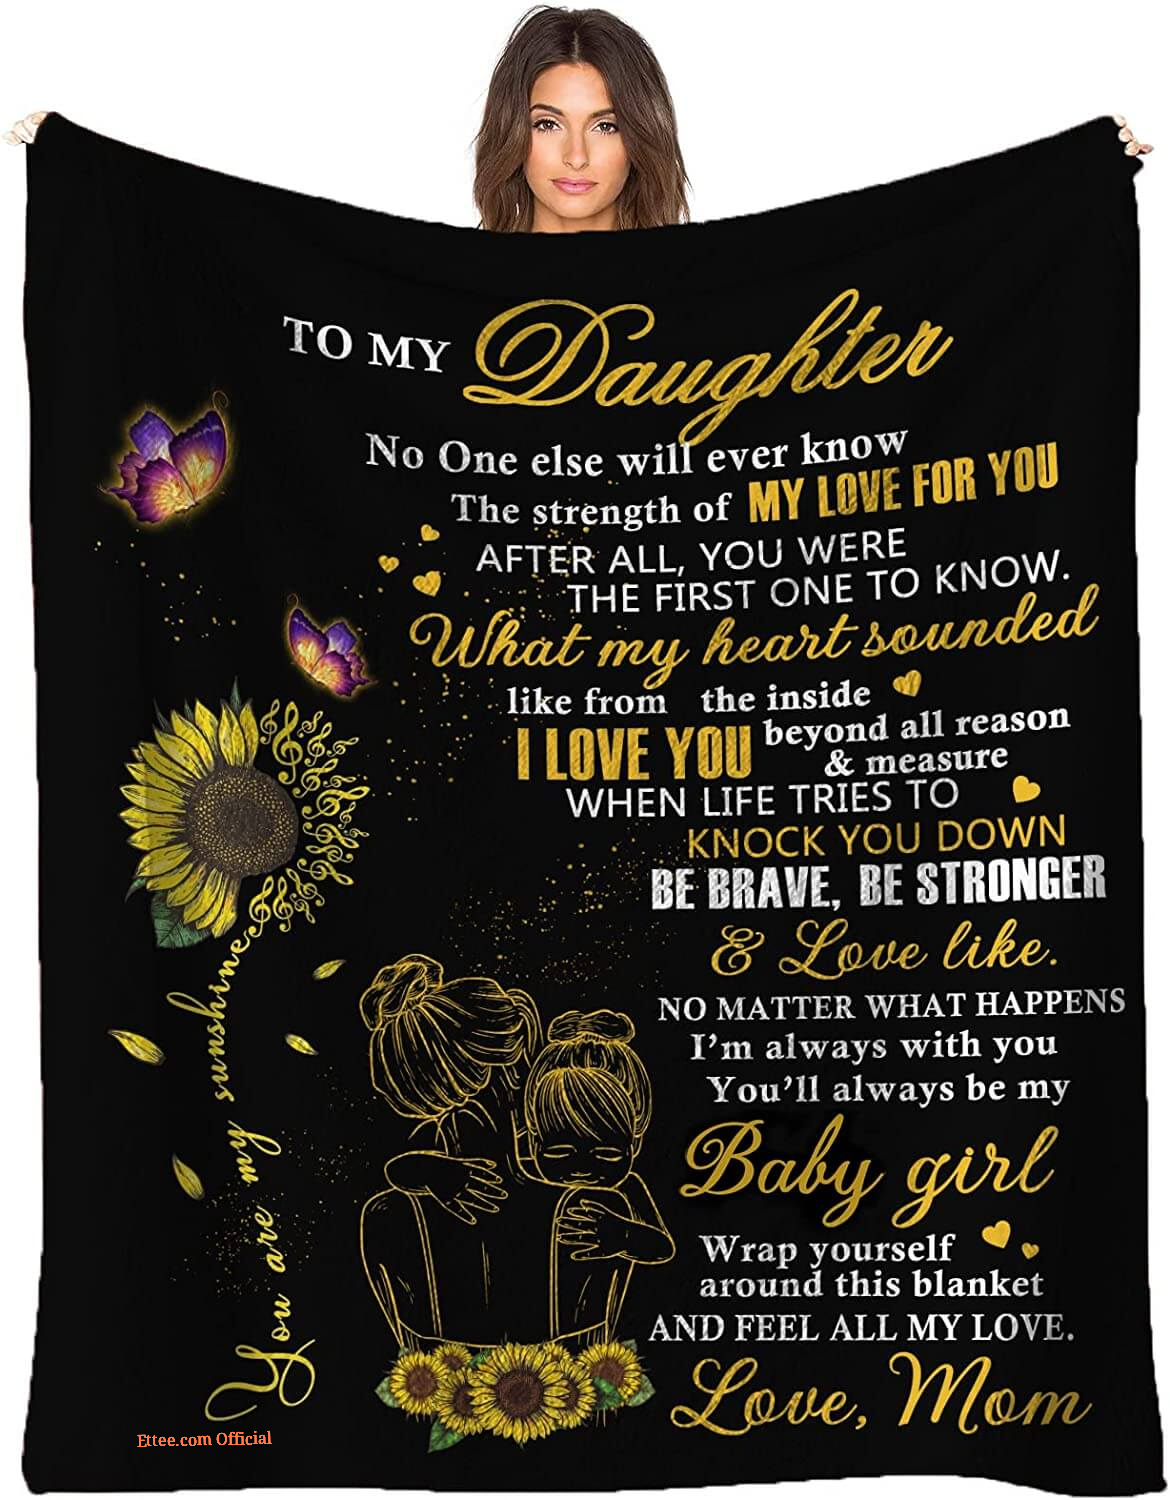 To My Daughter Quilt Blanket - Lightweight and Smooth Comfort - Ettee - Daughter Quilt Blanket